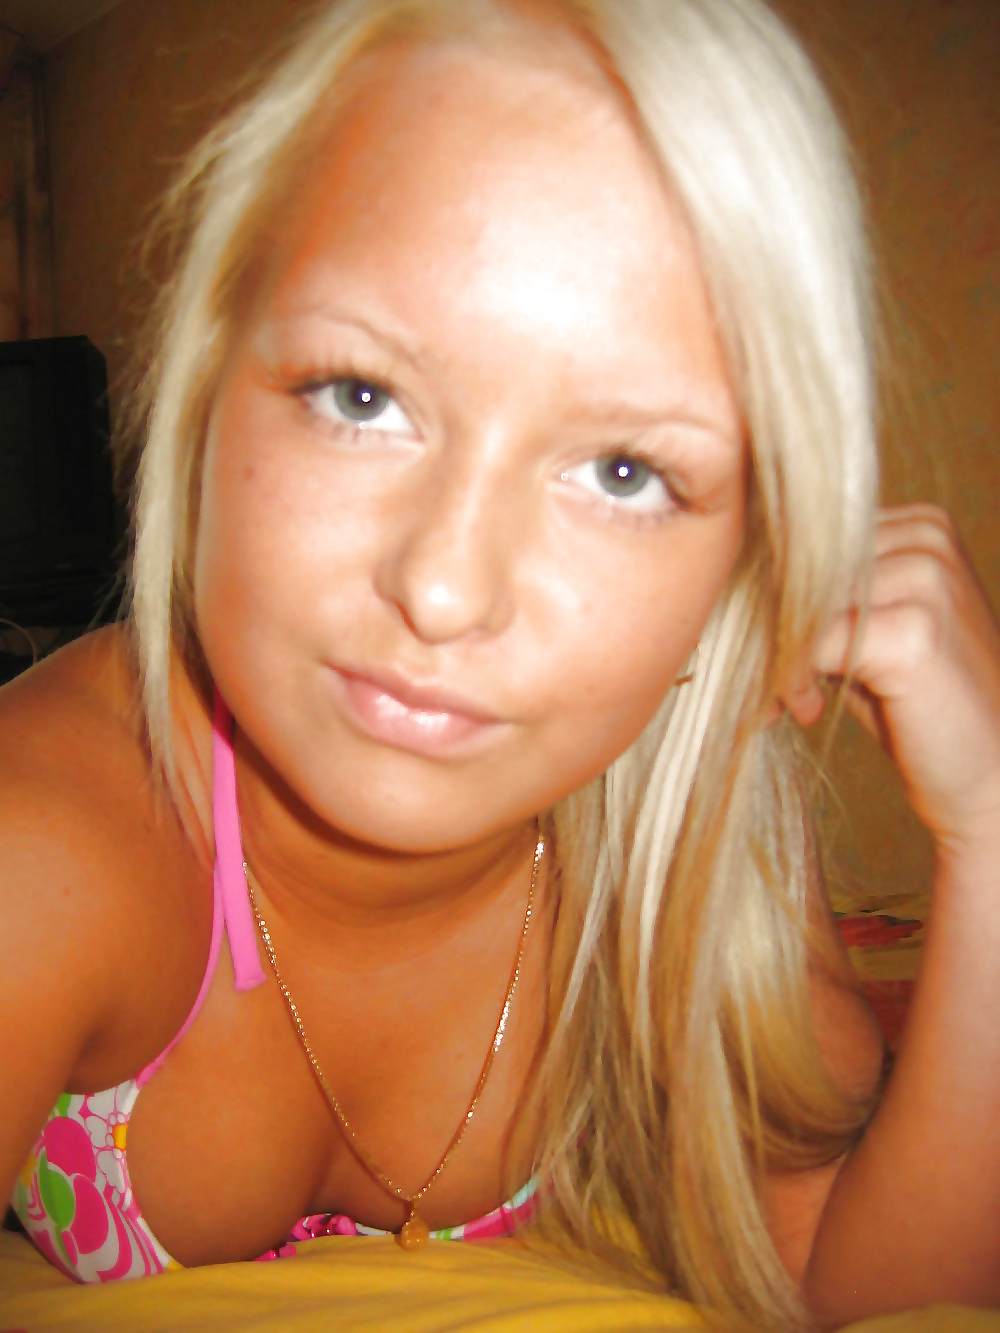 Amateur teen linda 18 from germany hot #10719066